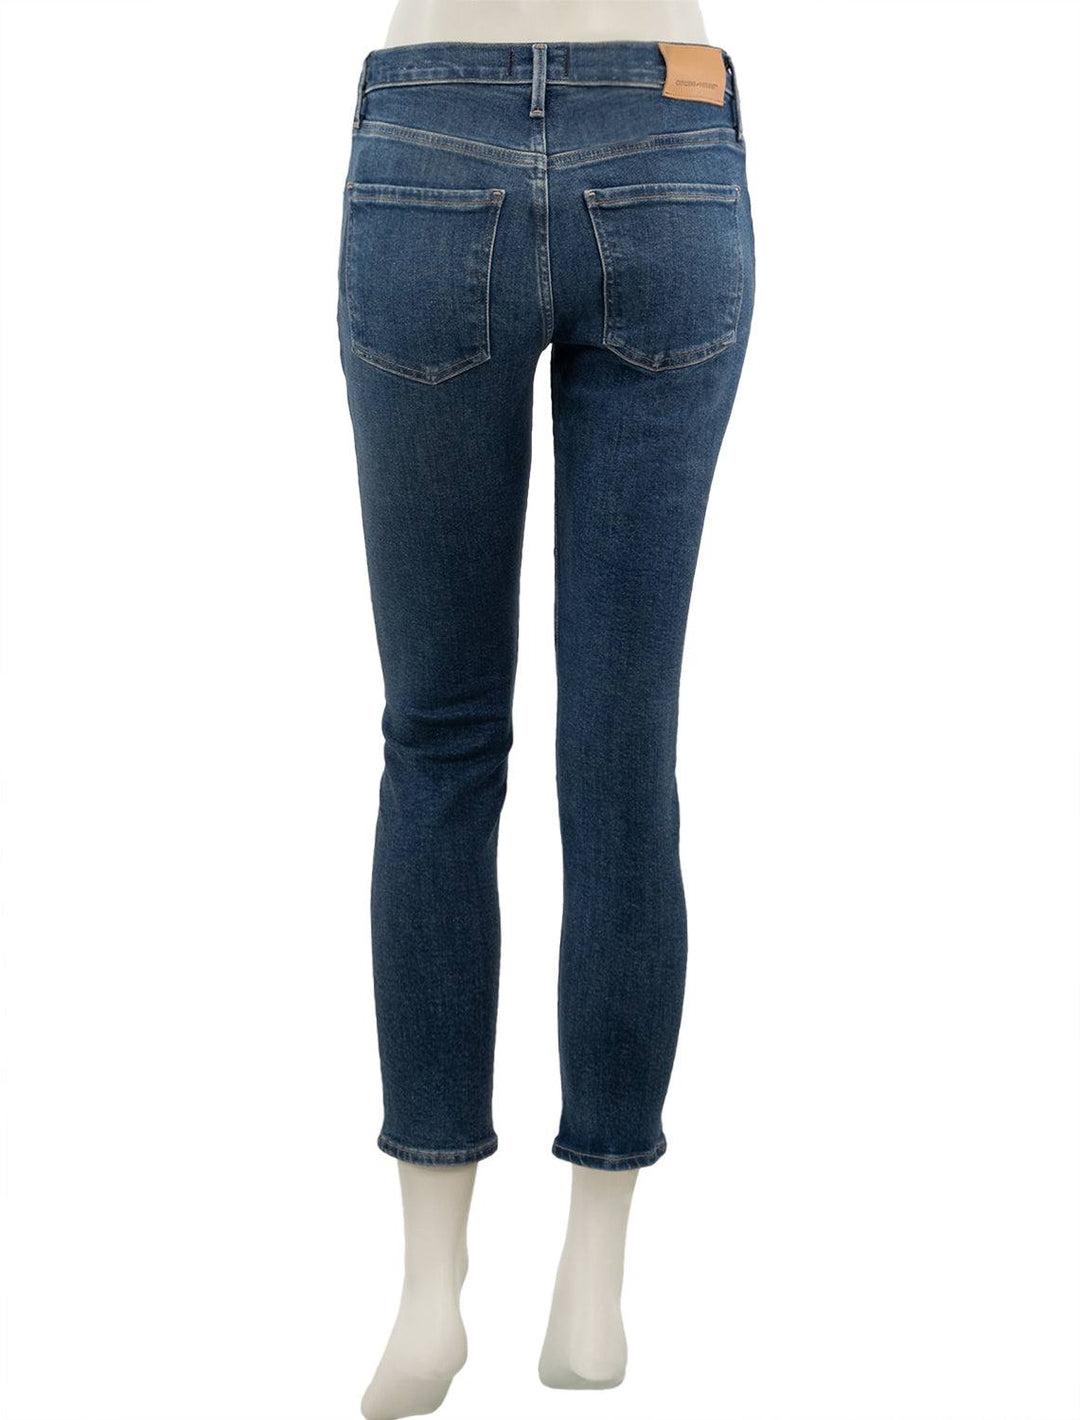 Back view of Front view of Citizen of Humanity's Ella Mid Rise Jeans in Sky Lantern.